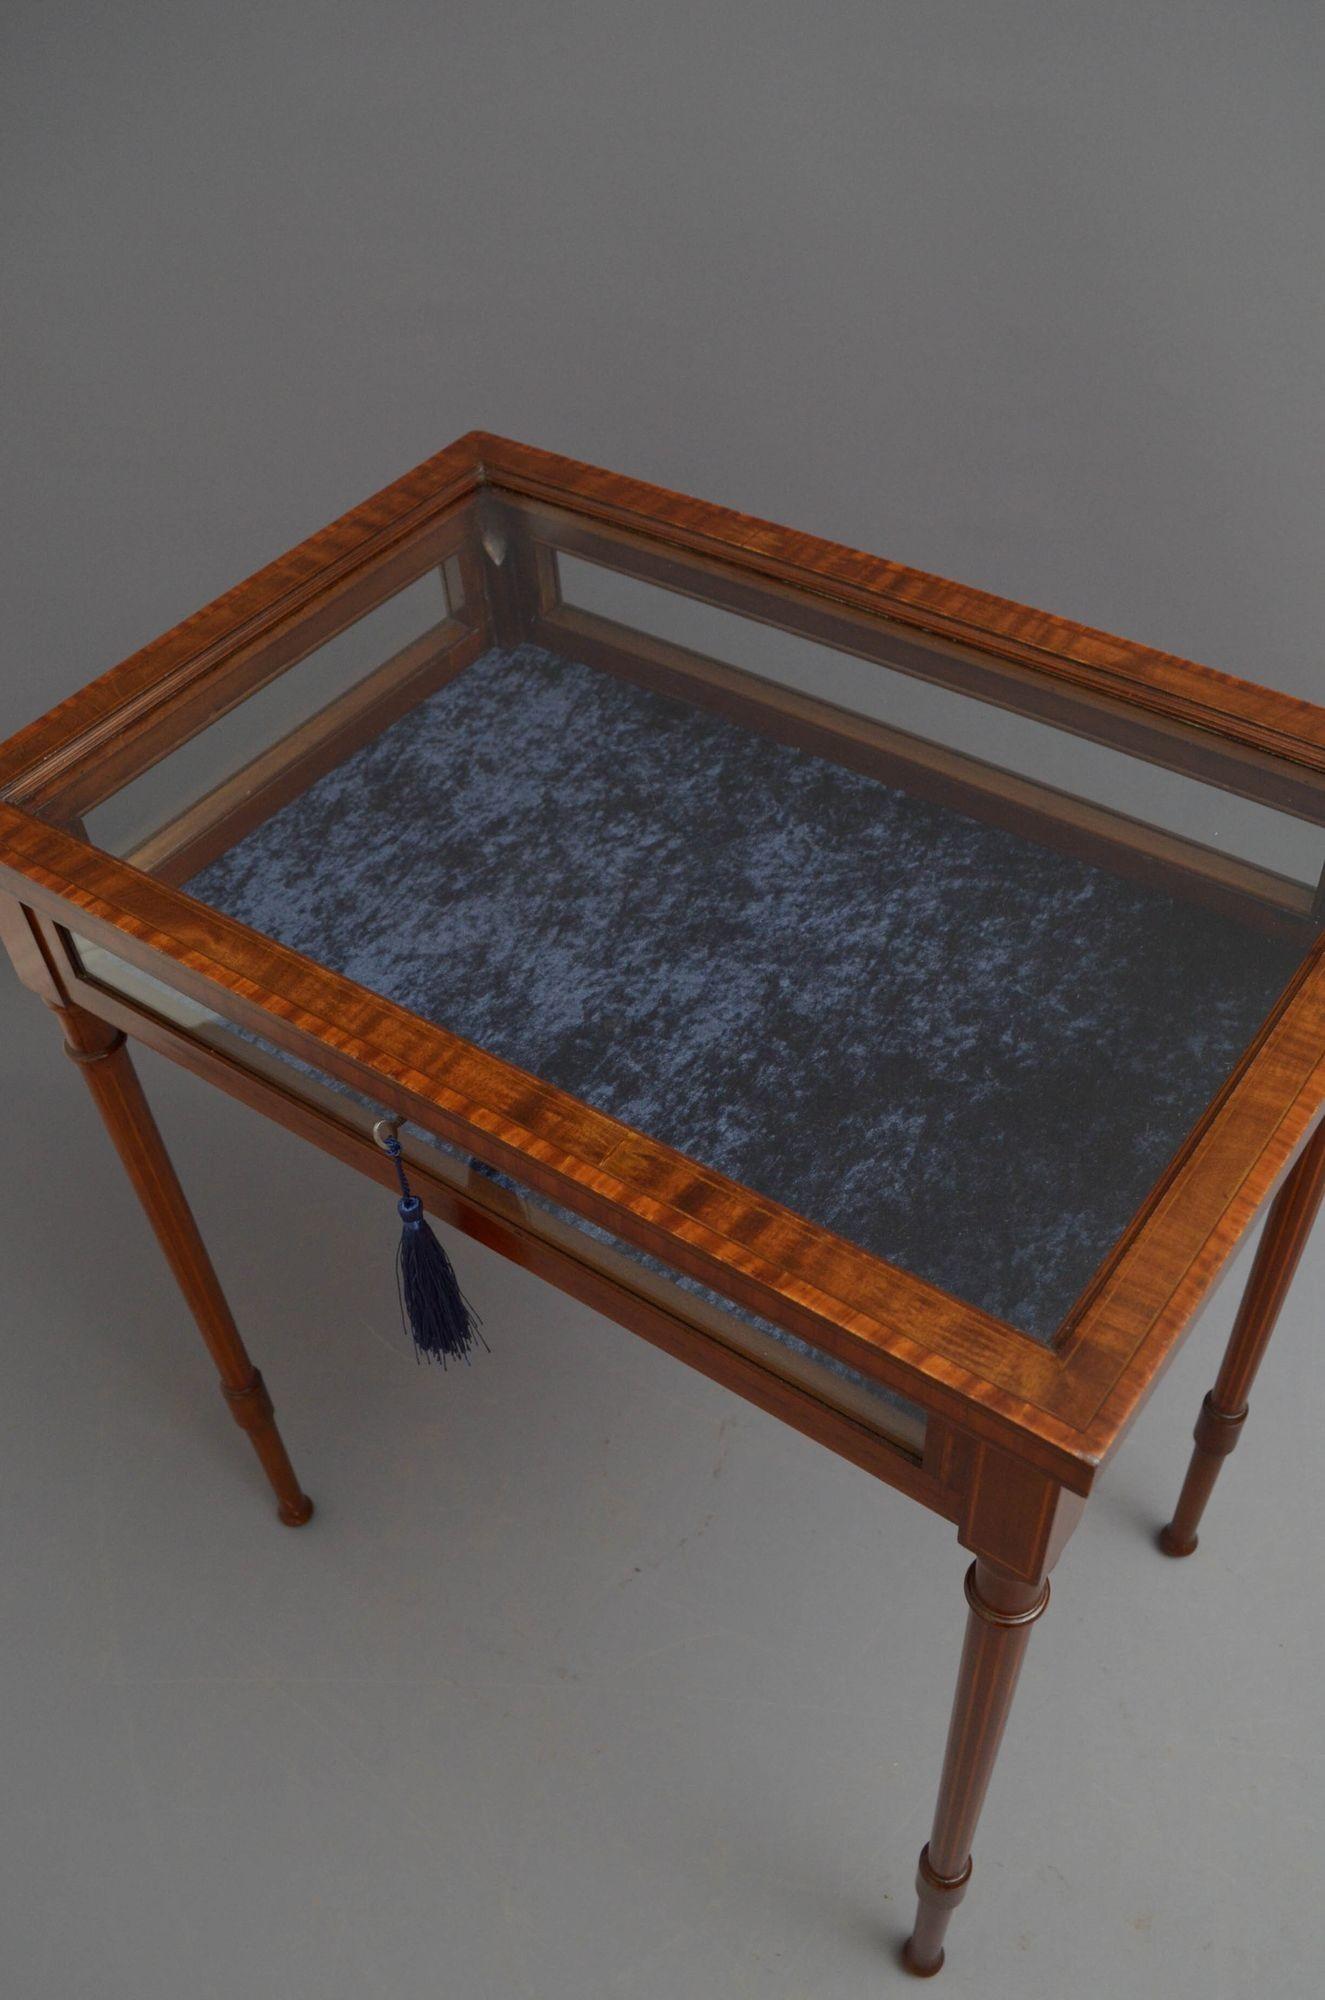 Sn5251 Fine Edwardian mahogany and inlaid display table, having satinwood crossbanded hinged top fitted with original working lock and a key and newly relined interior, standing on turned, string inlaid legs. This antique display table retains its